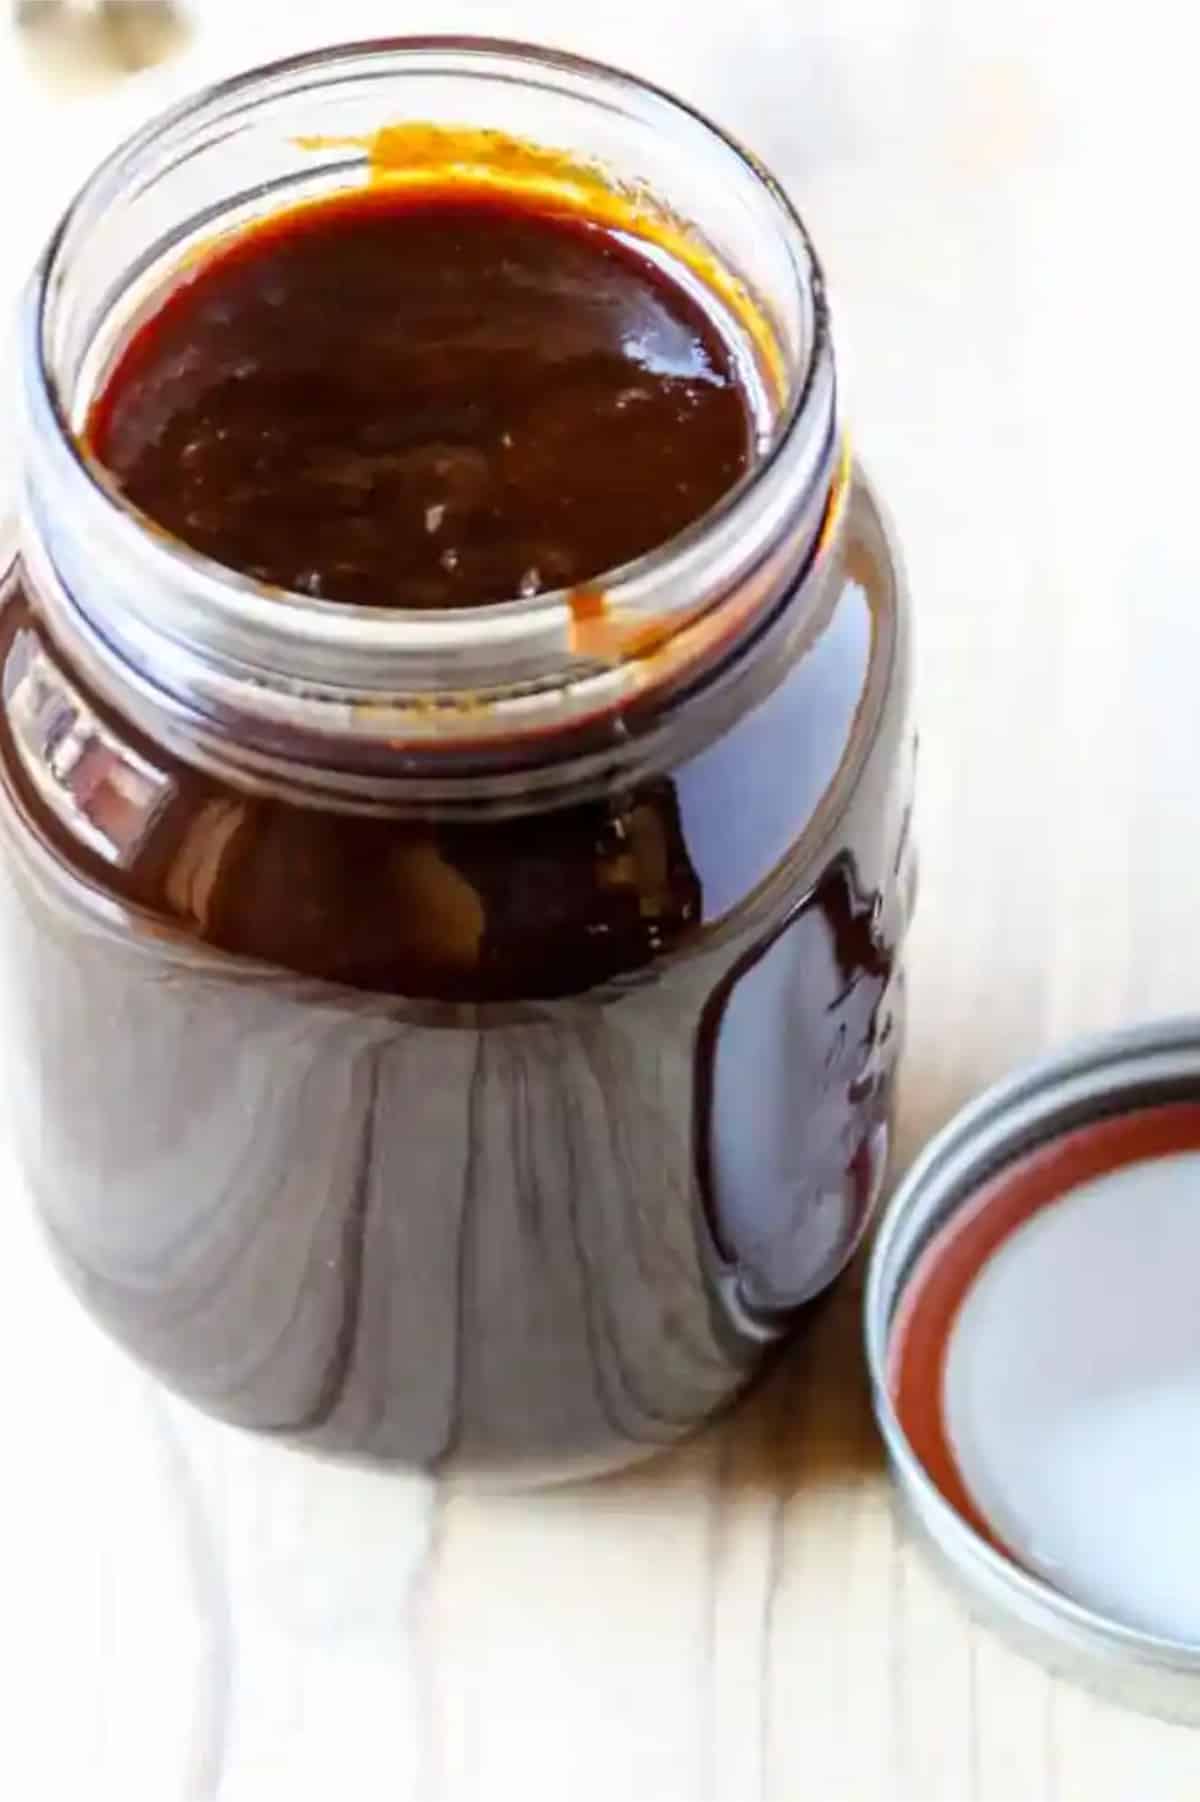 molasses barbecue sauce cookout condiments..